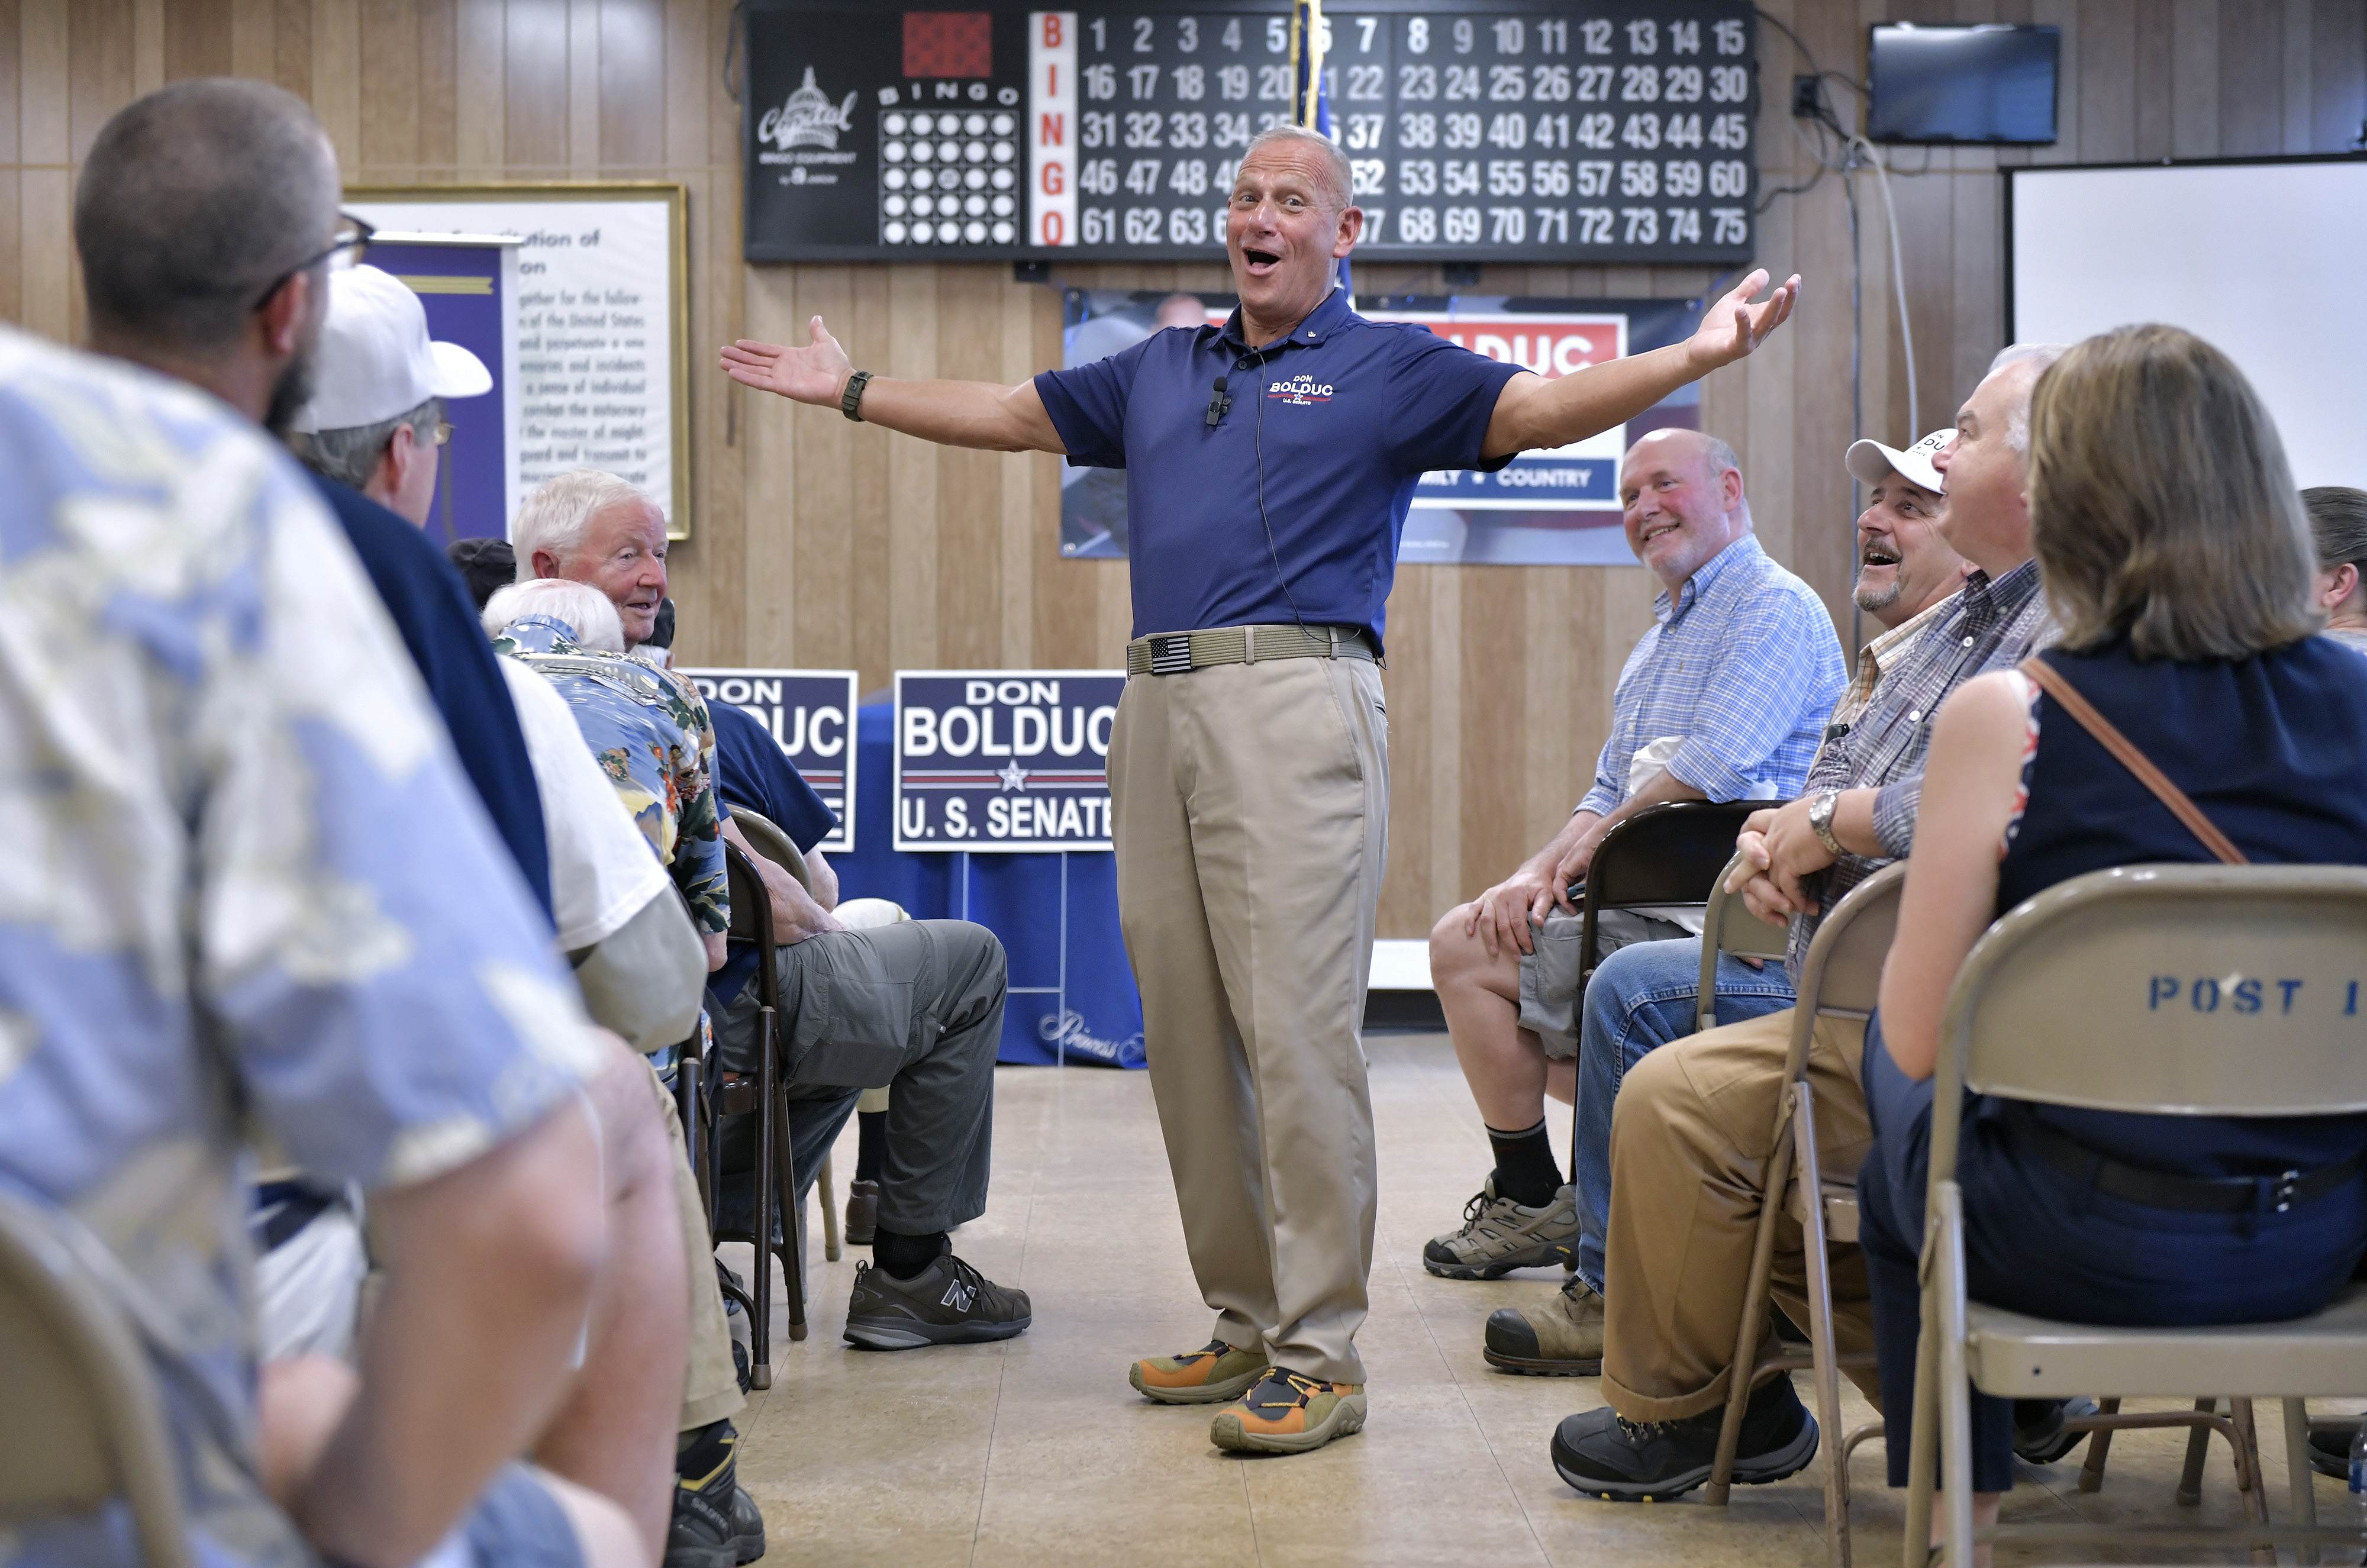 Don Bolduc speaks at a campaign event at an American Legion Hall